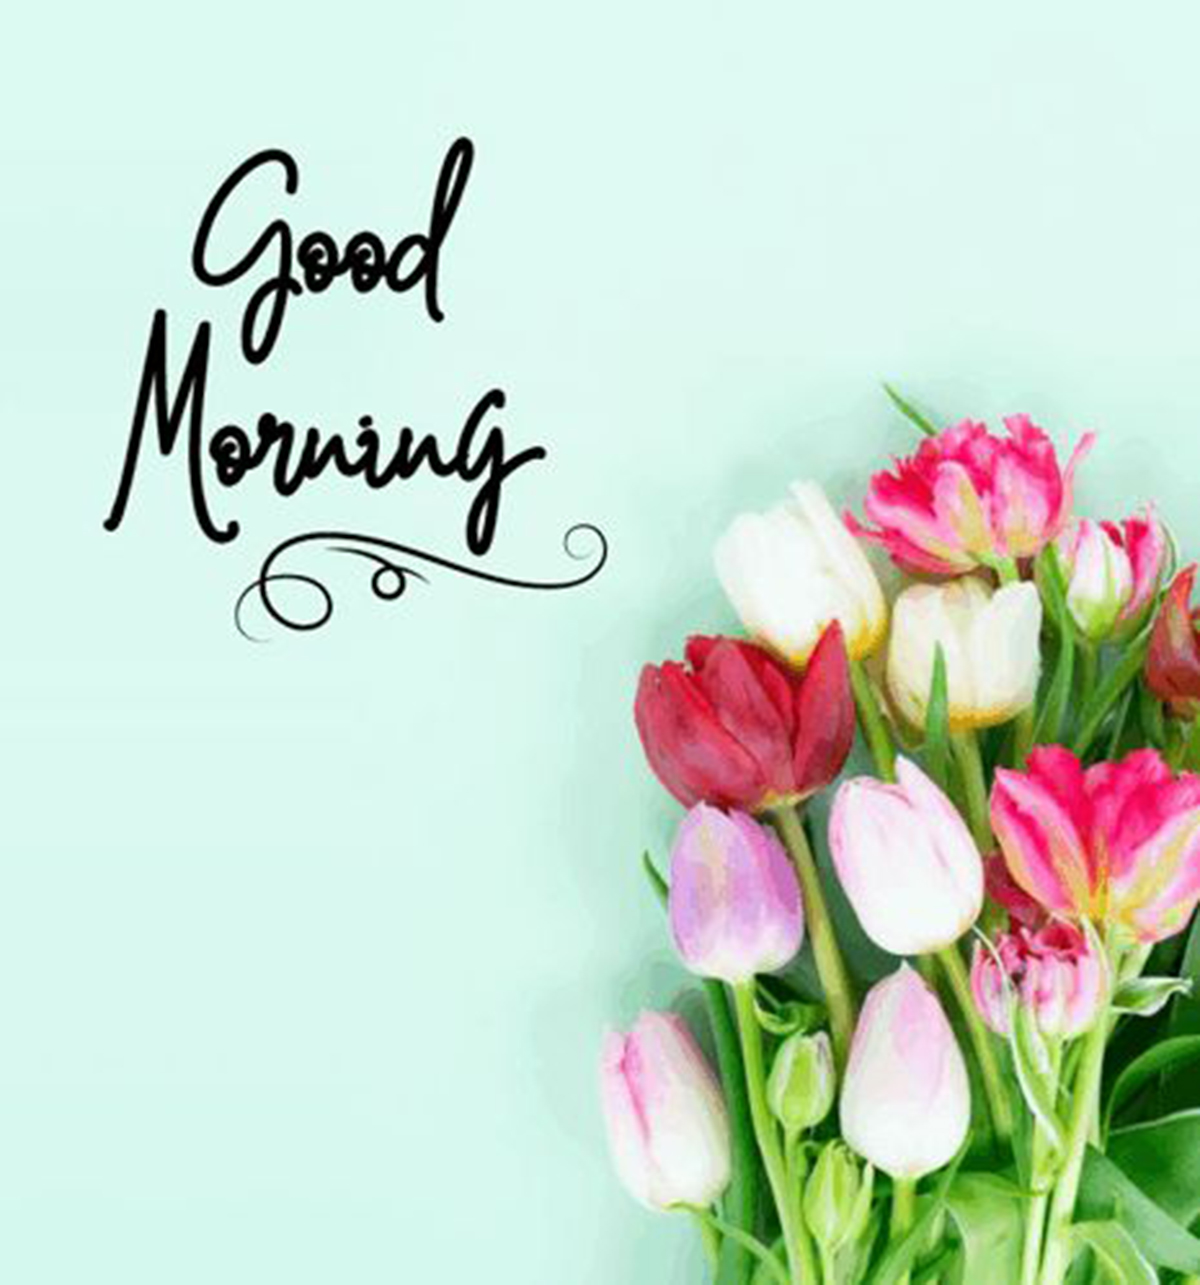 Flower Picture with Good Morning Message